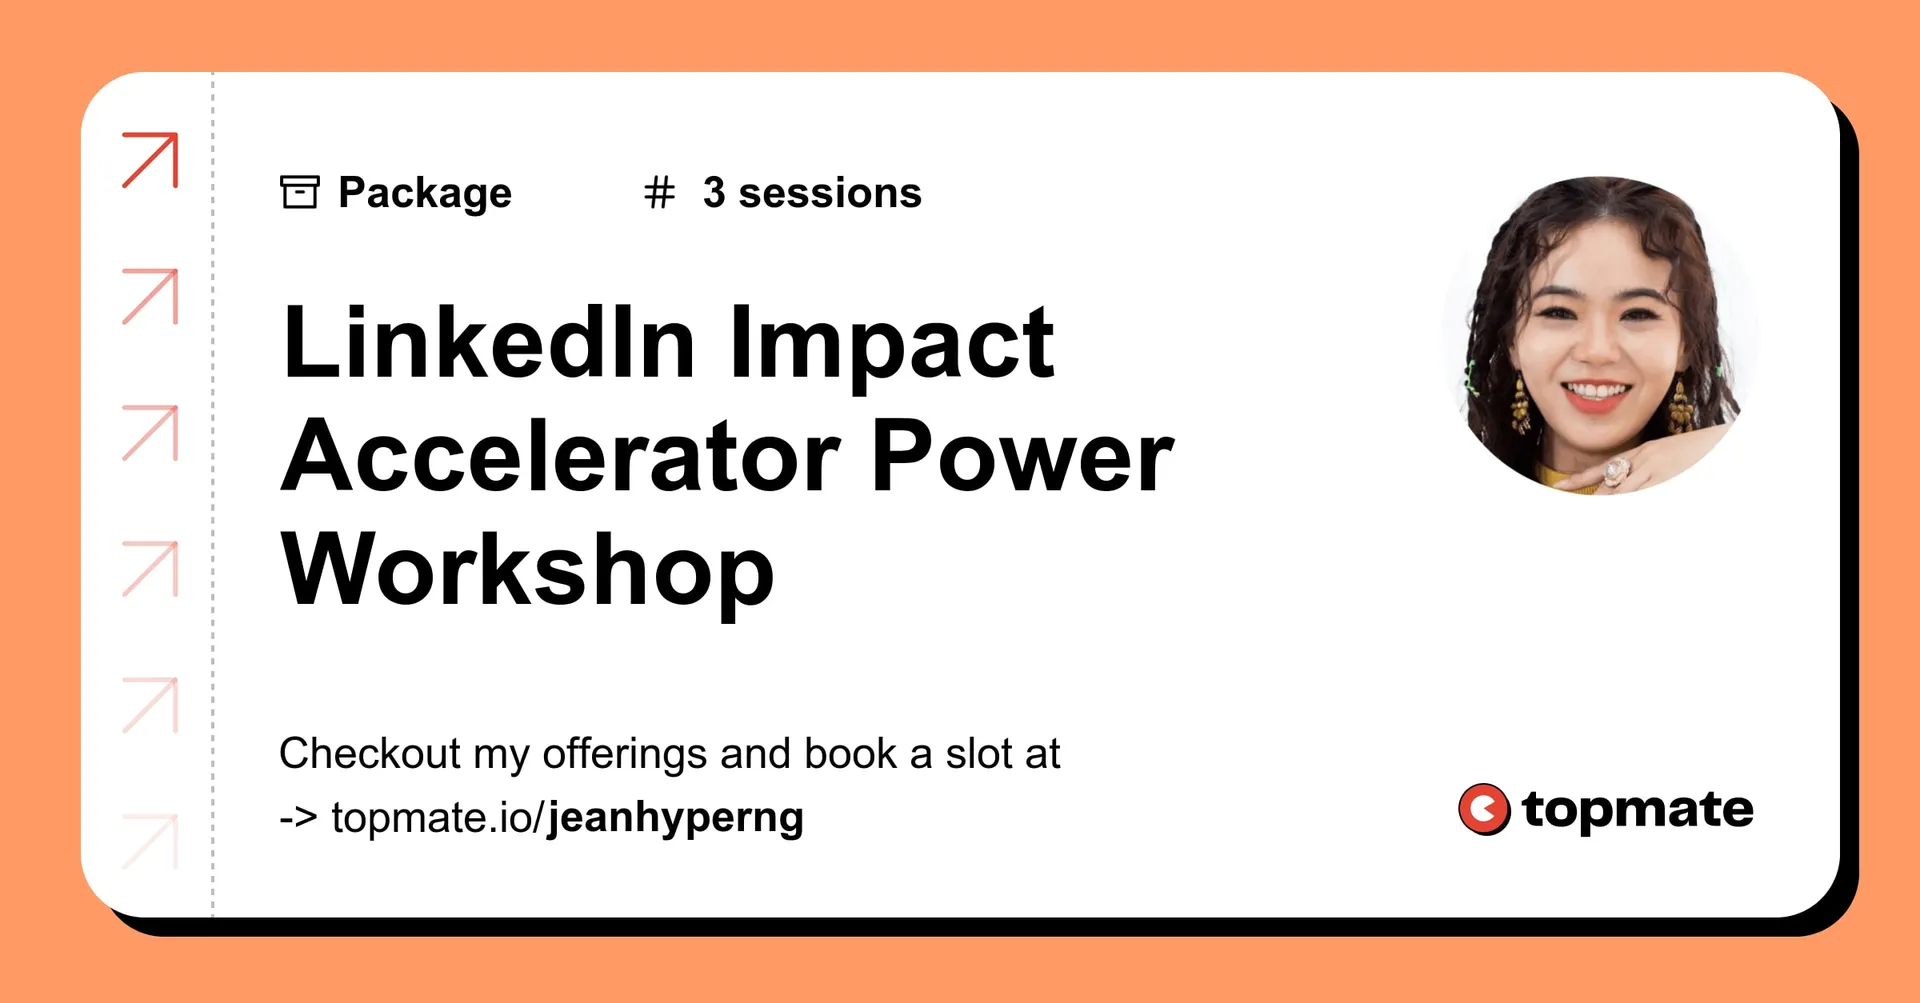 🚀 Ready to skyrocket your LinkedIn influence and achieve lasting outcomes?

🗓️ Mark your calendar for our "14-Day Increase Your Impact" Coaching Workshop, starting on August 17th, 2023.

Join our exclusive group coaching workshop, guided by none other than the LinkedIn Guru, Jean Ng. Designed for LinkedIn newcomers, this workshop promises to elevate your online presence like never before.

✨ Here's What Awaits You:

📌 Amplify post impressions by 10x, paving the way for new opportunities
📌 Construct a commanding brand presence, benefiting both you and your business
📌 Garner heightened visibility for a sustained and impactful footprint

Who Should Attend?

💠LinkedIn users with under 300 connections
💠College/University students eager to harness the power of LinkedIn

Embark on a 14-day journey to unveil your extraordinary potential and forge your personalized Impact Plan. Every Tuesday, join us online to gain access to pragmatic tools, expert coaching, and tap into my LinkedIn network, all while instantly amping up your impact.

Supercharge your outcomes, establish an influential brand, and imprint a lasting legacy in your industry.

👉🏻👉🏻👉🏻Click link to register.

https://topmate.io/jeanhyperng/486254

#LinkedIn